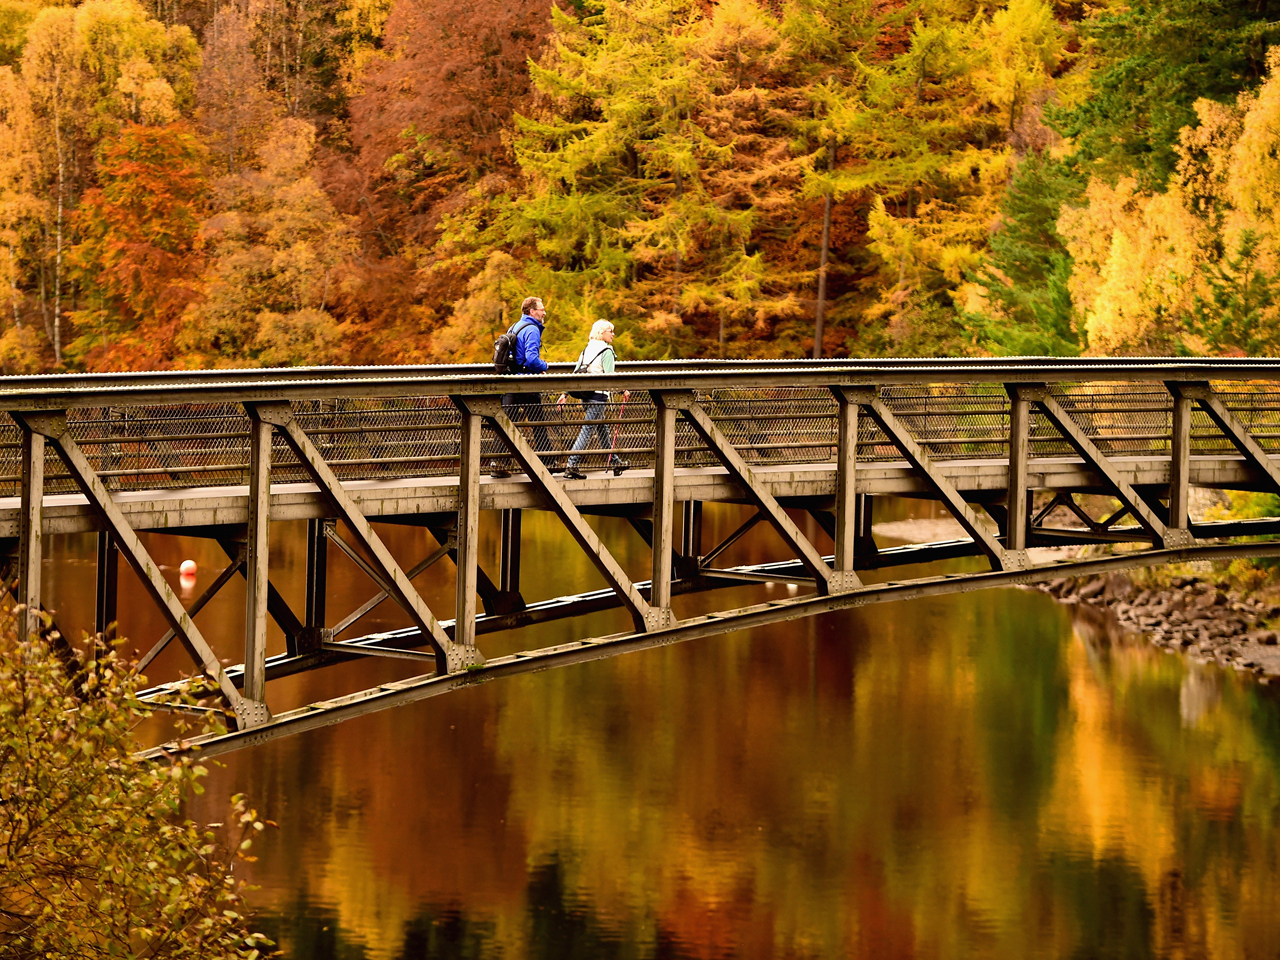 West Virginia - Fall foliage 2014 - Pictures - CBS News